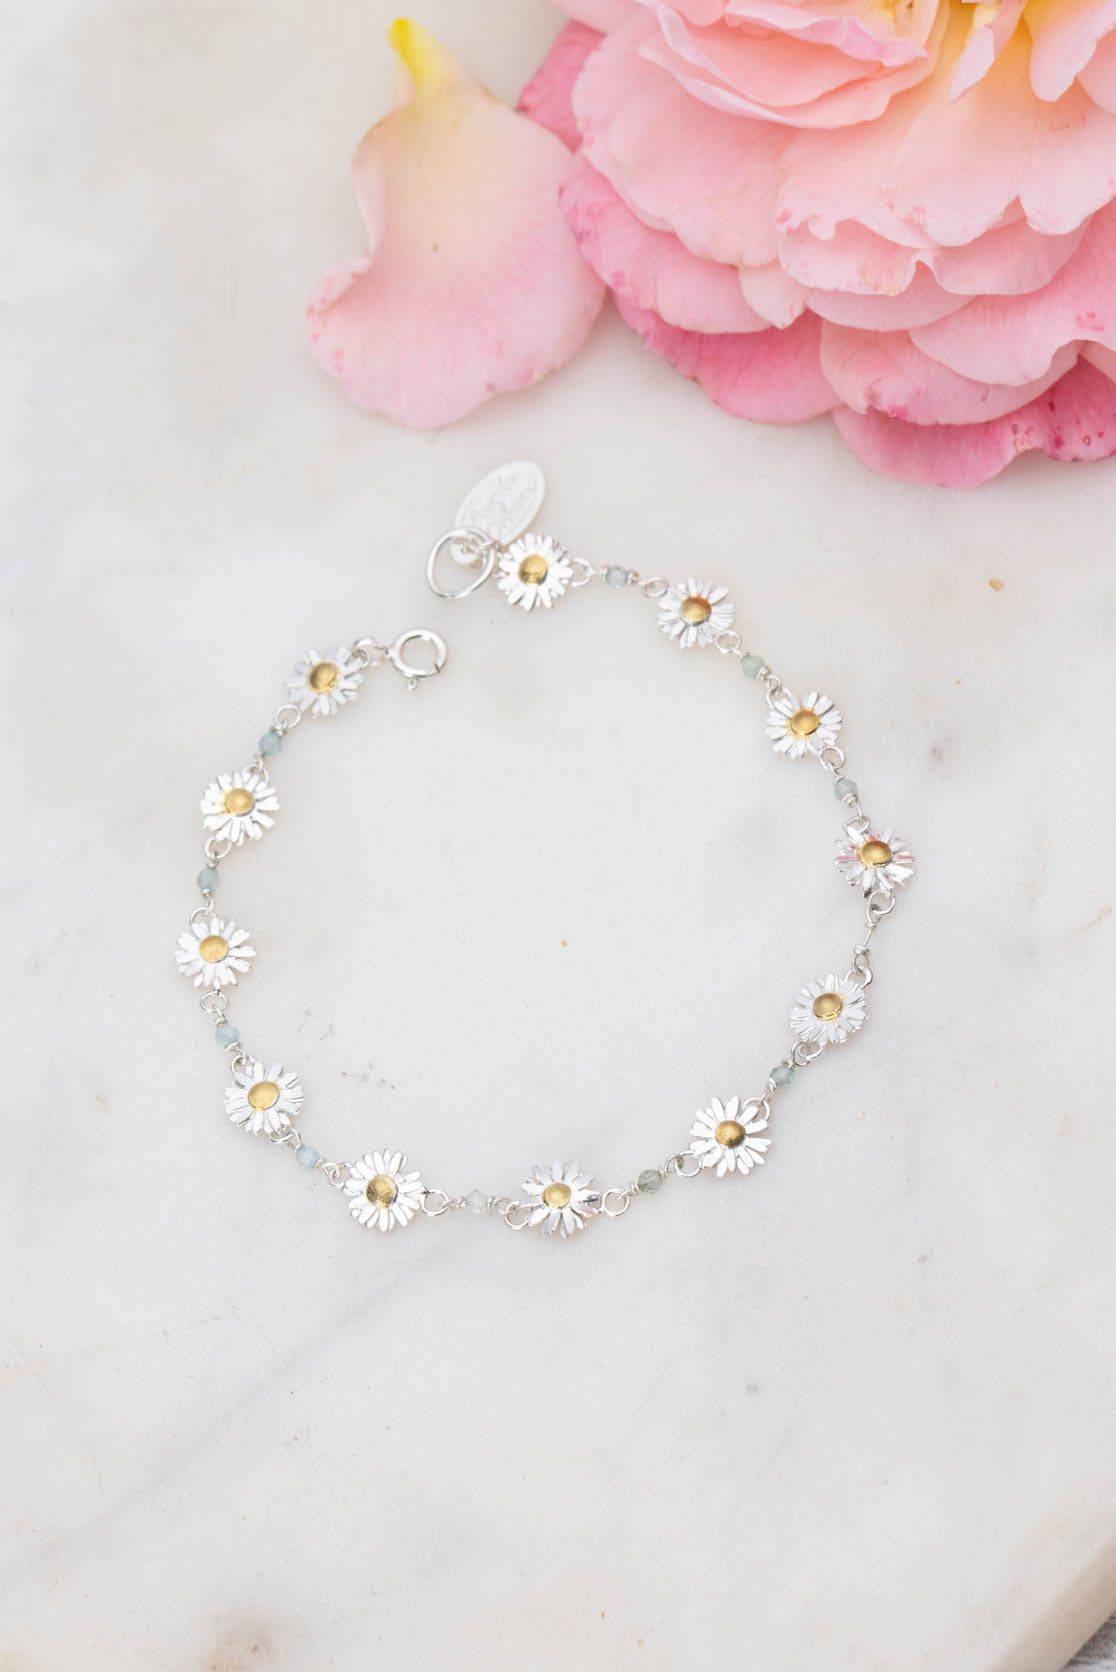 Daisy Chain Bracelet In Sterling Silver With 9ct Gold And Apatite